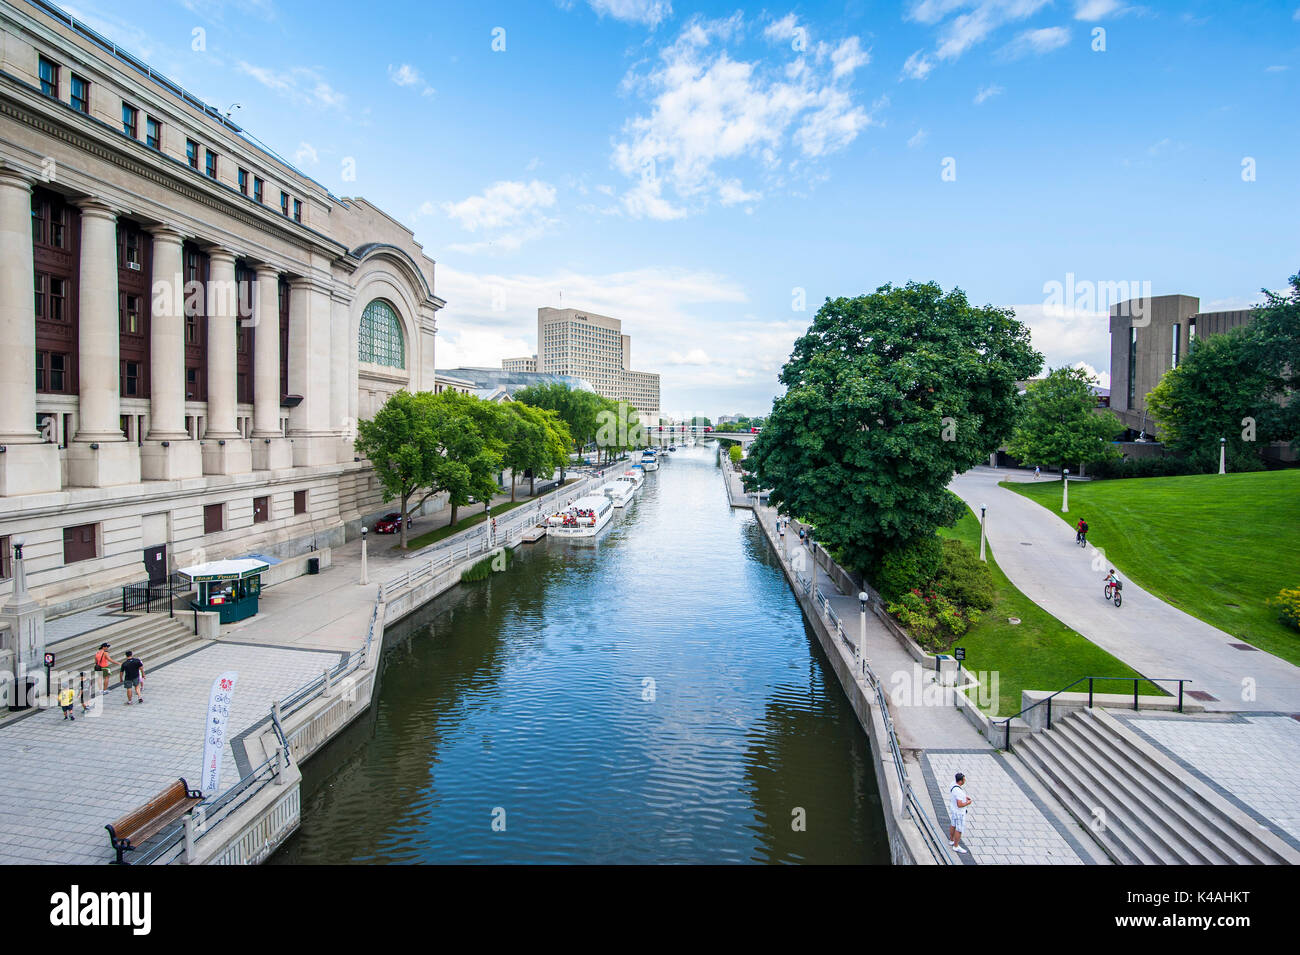 Government Conference Center on the Rideau canal, Ottawa, Ontario, Canada Stock Photo